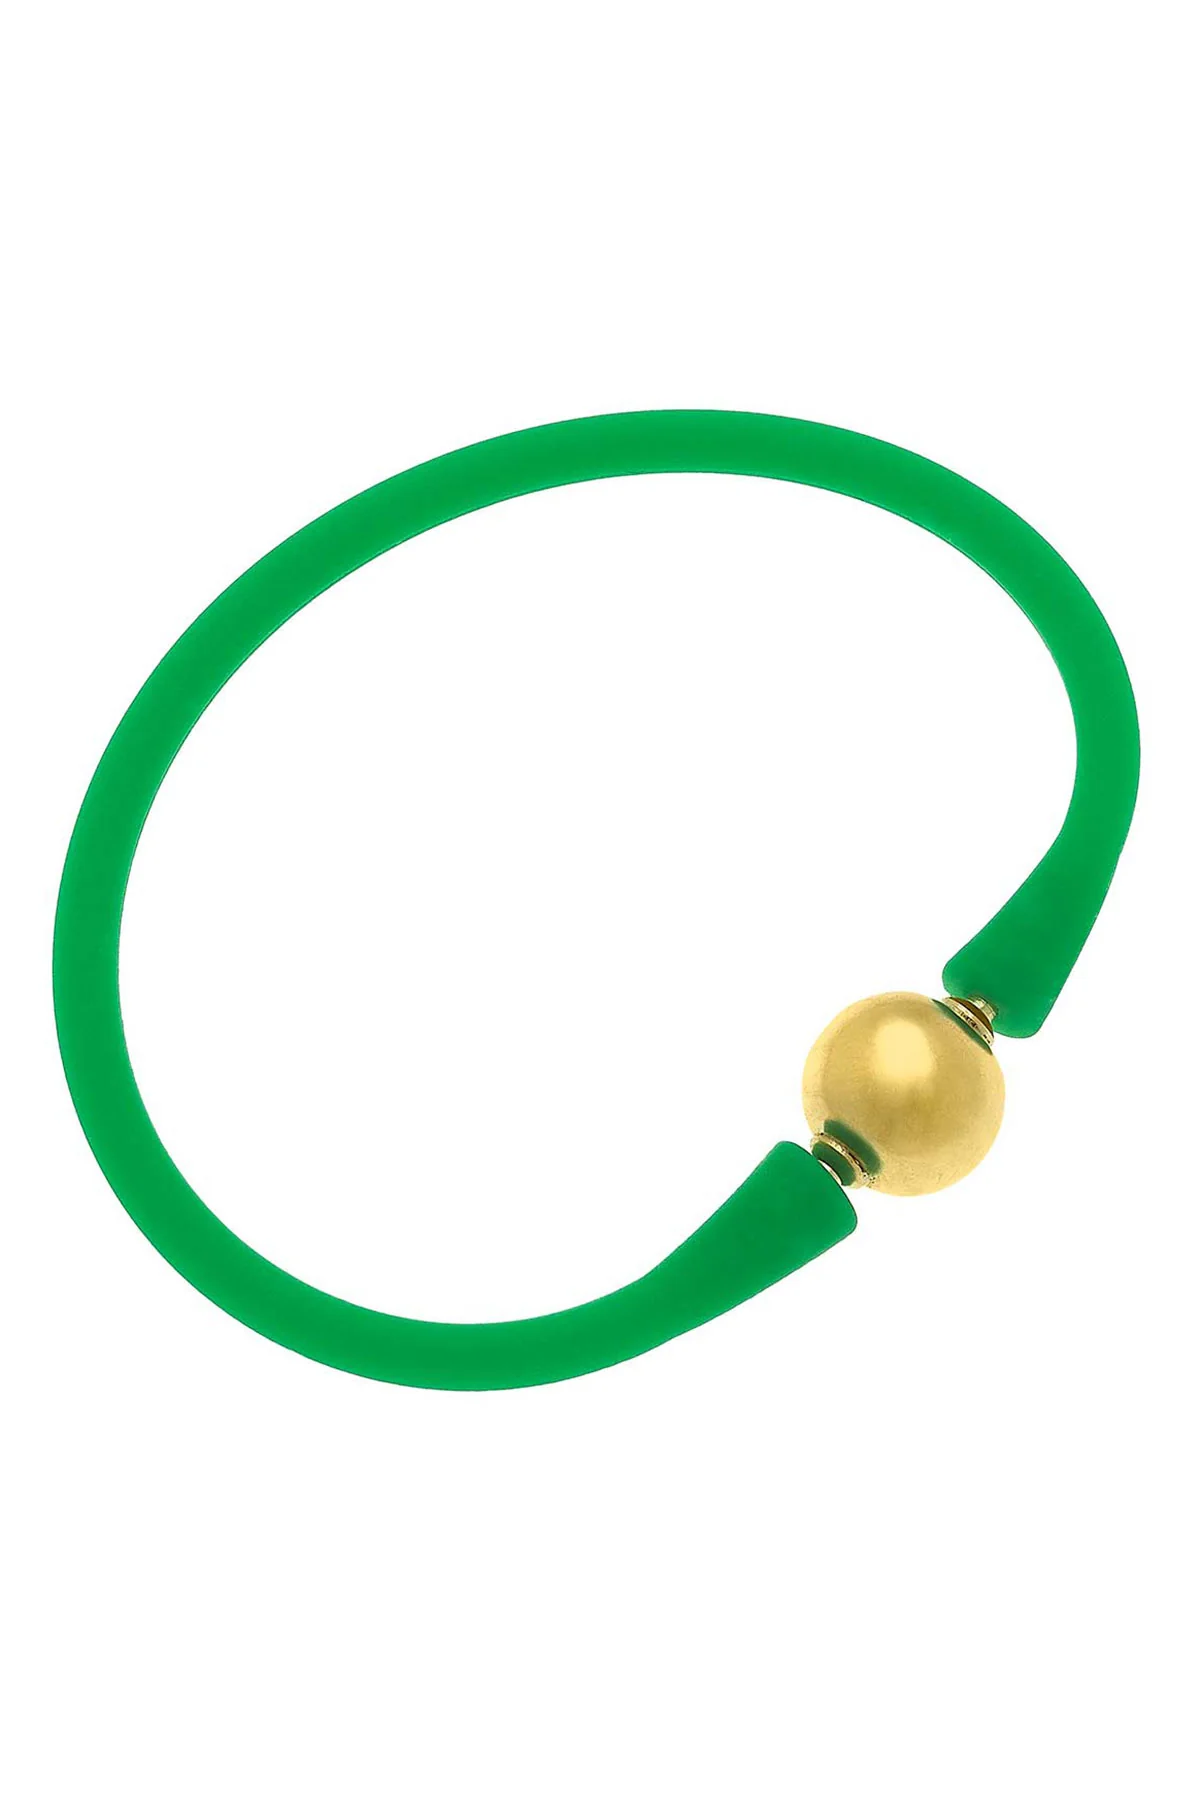 Bali 24K Plated Ball Bead Silicone Bracelet-Green